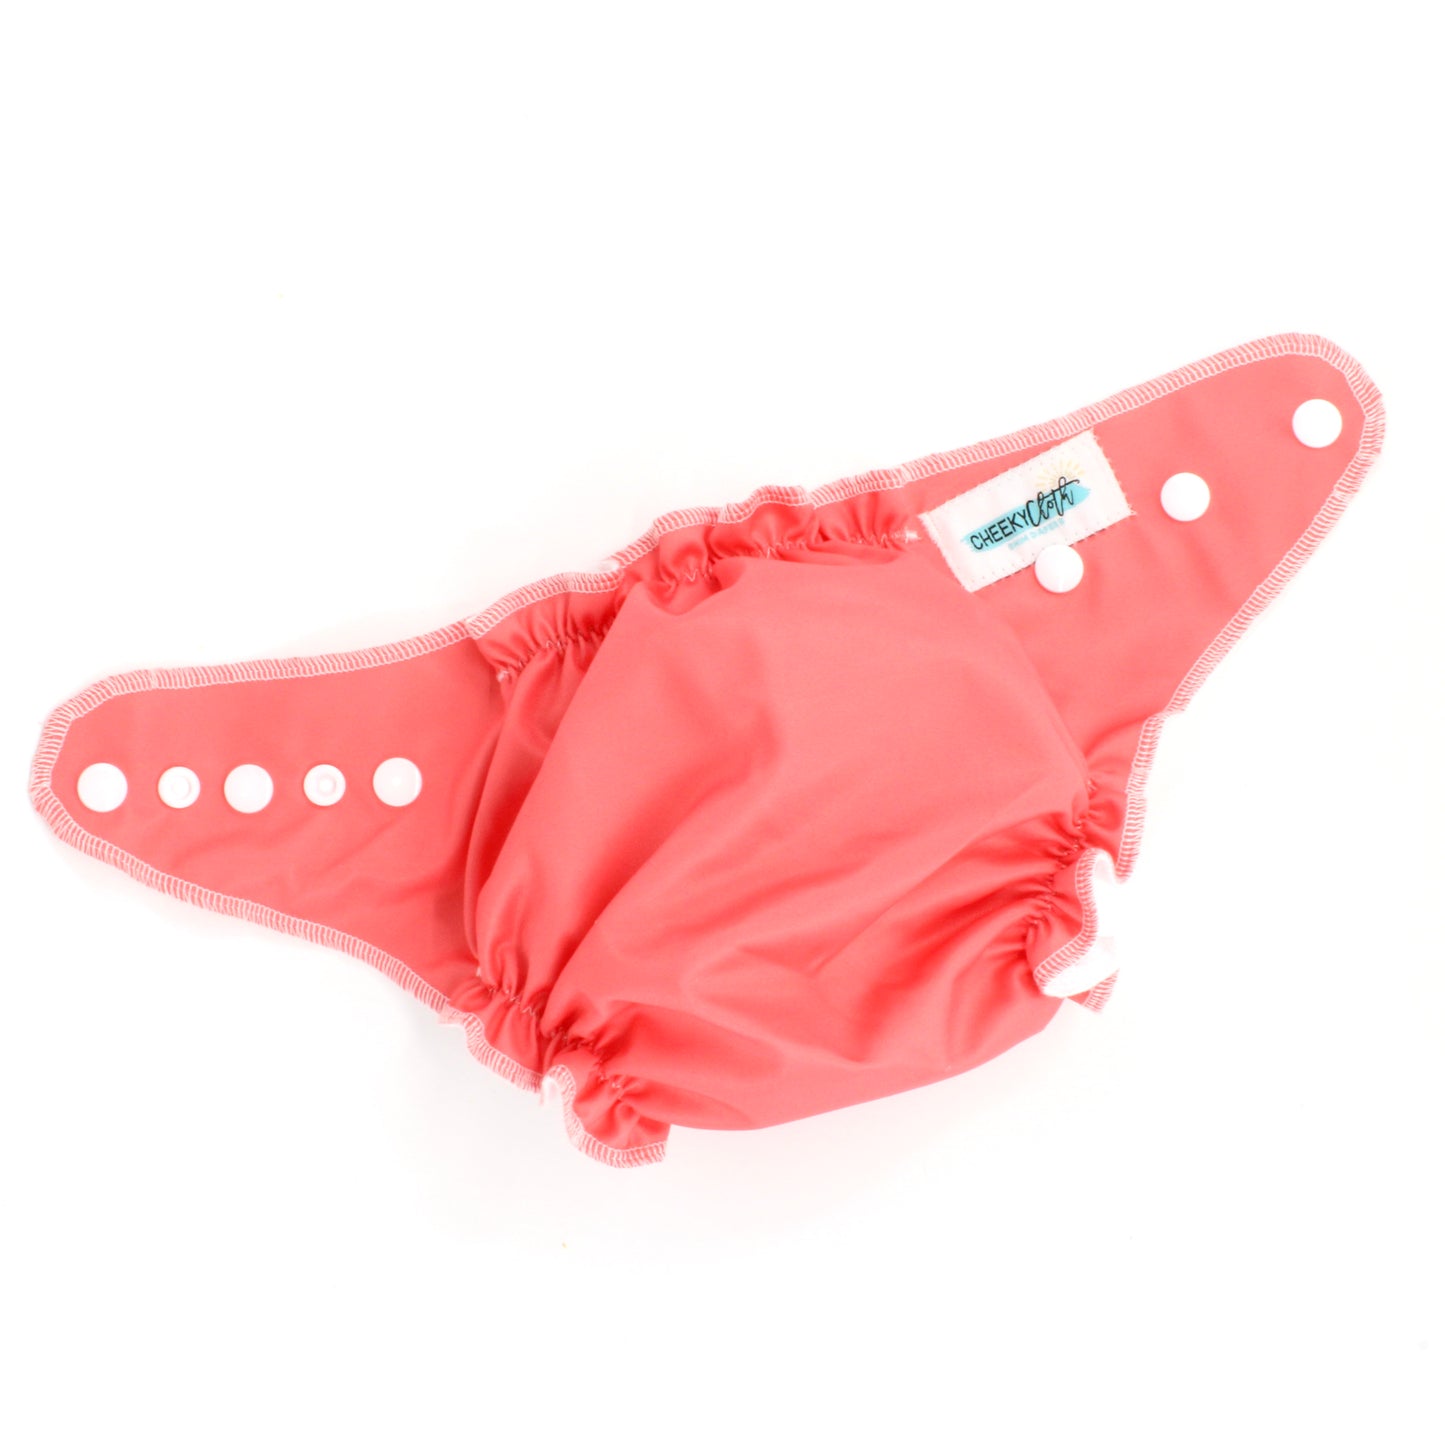 Cheeky Cloth One Size Reusable Swim Diaper "Punch Pink"